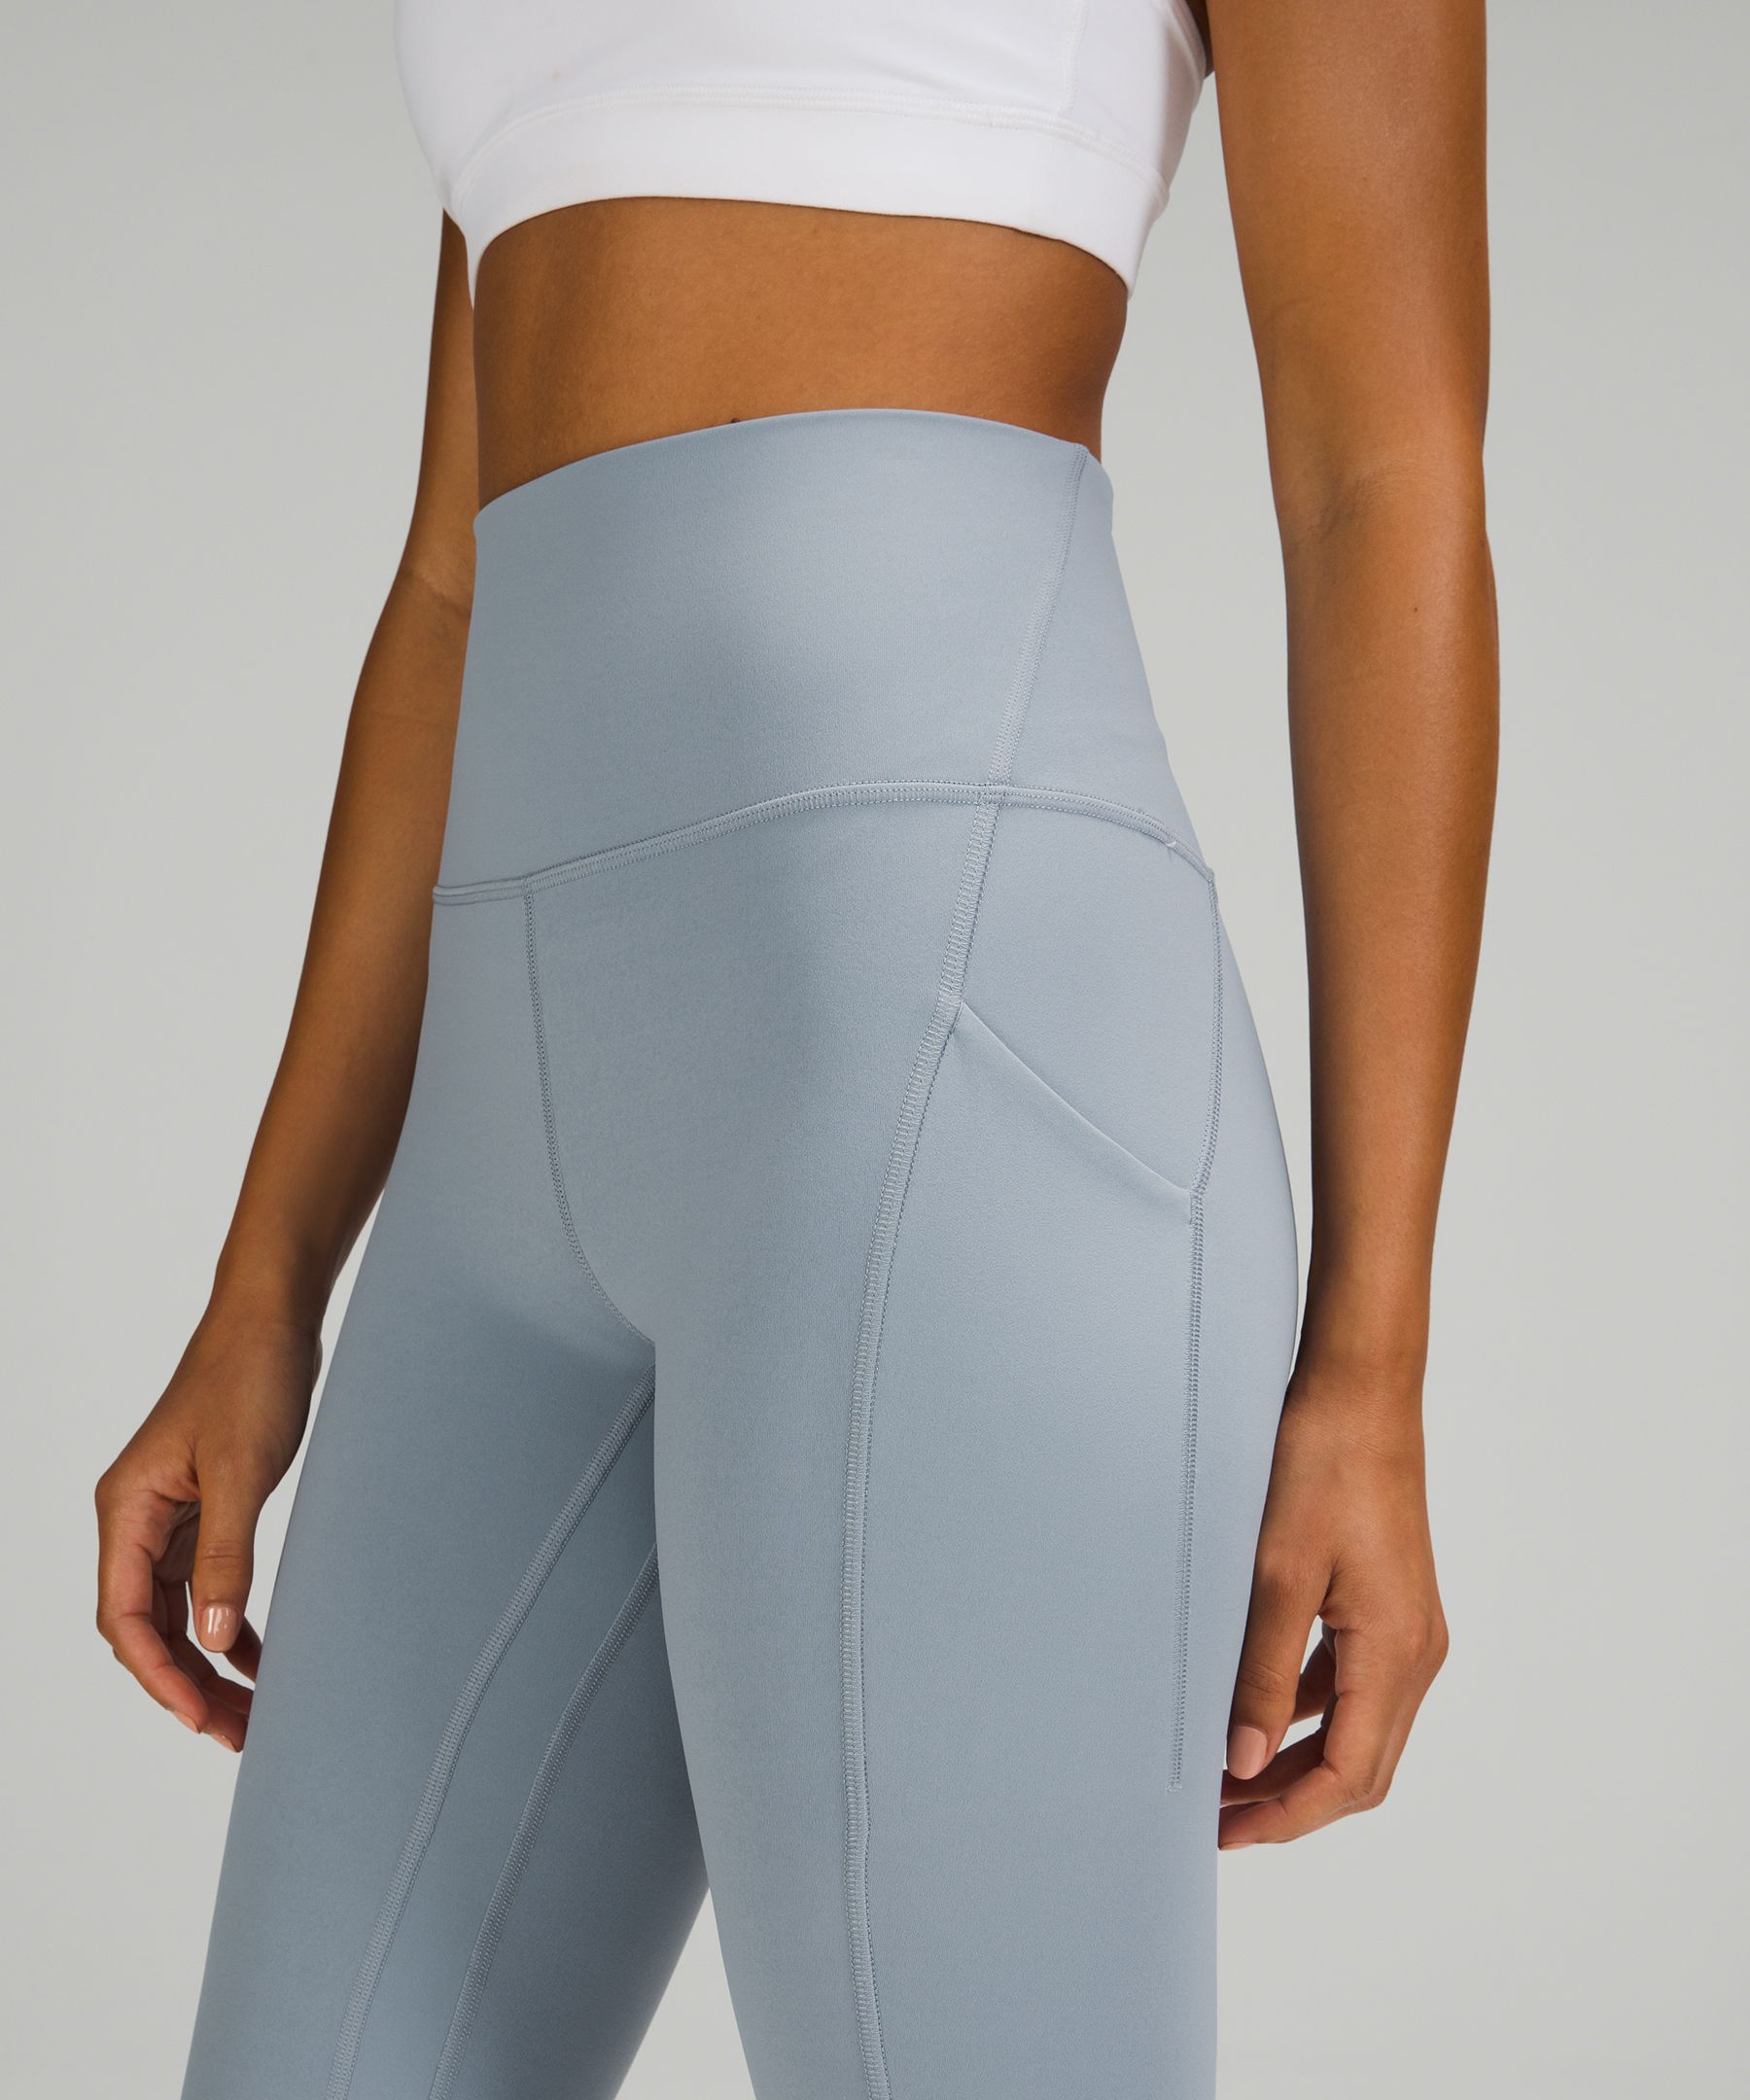 NWT Lululemon All The Right Places Crop 23 8 Graphite Grey Gray